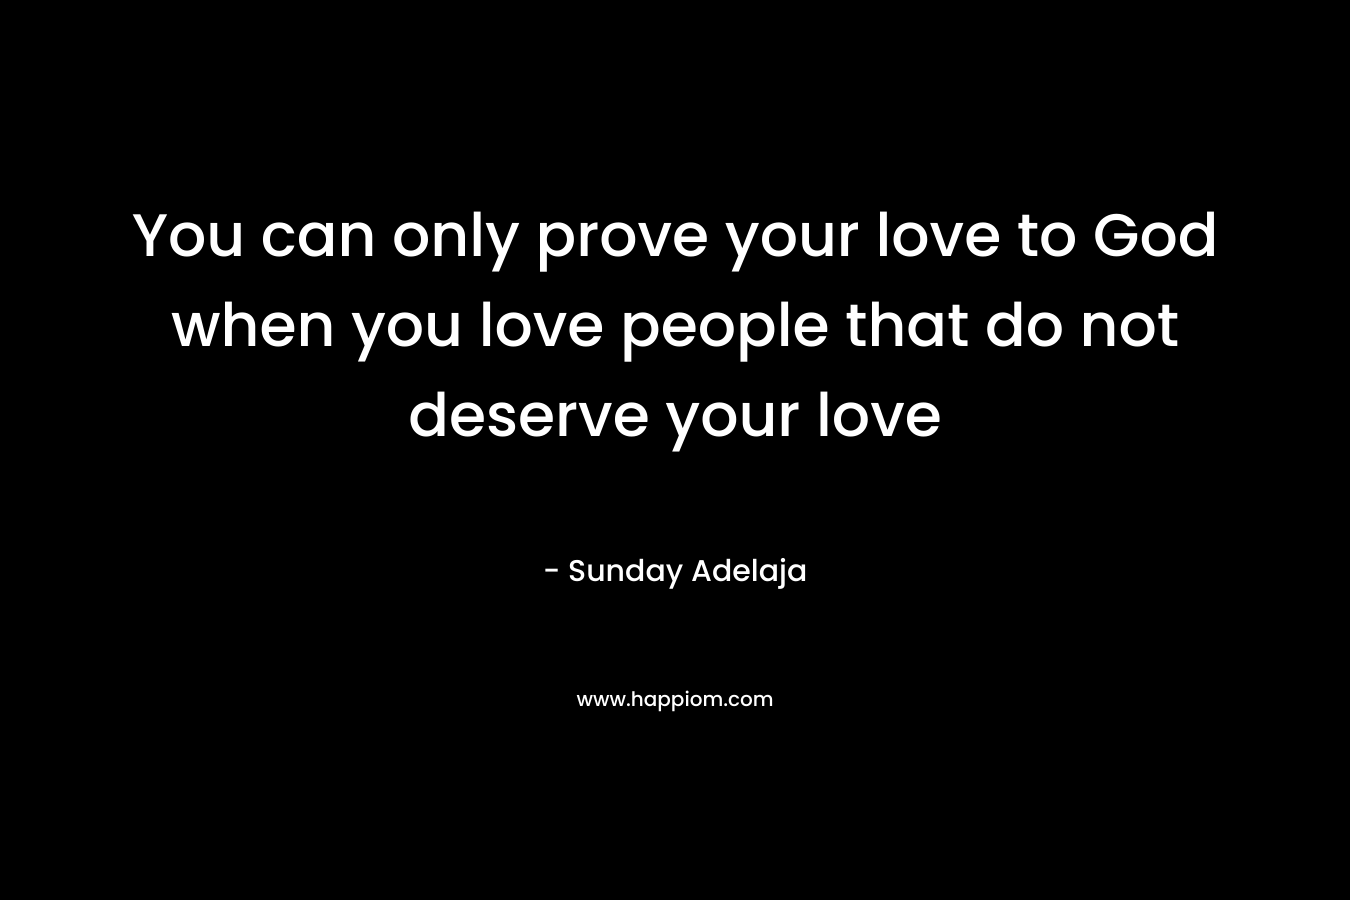 You can only prove your love to God when you love people that do not deserve your love